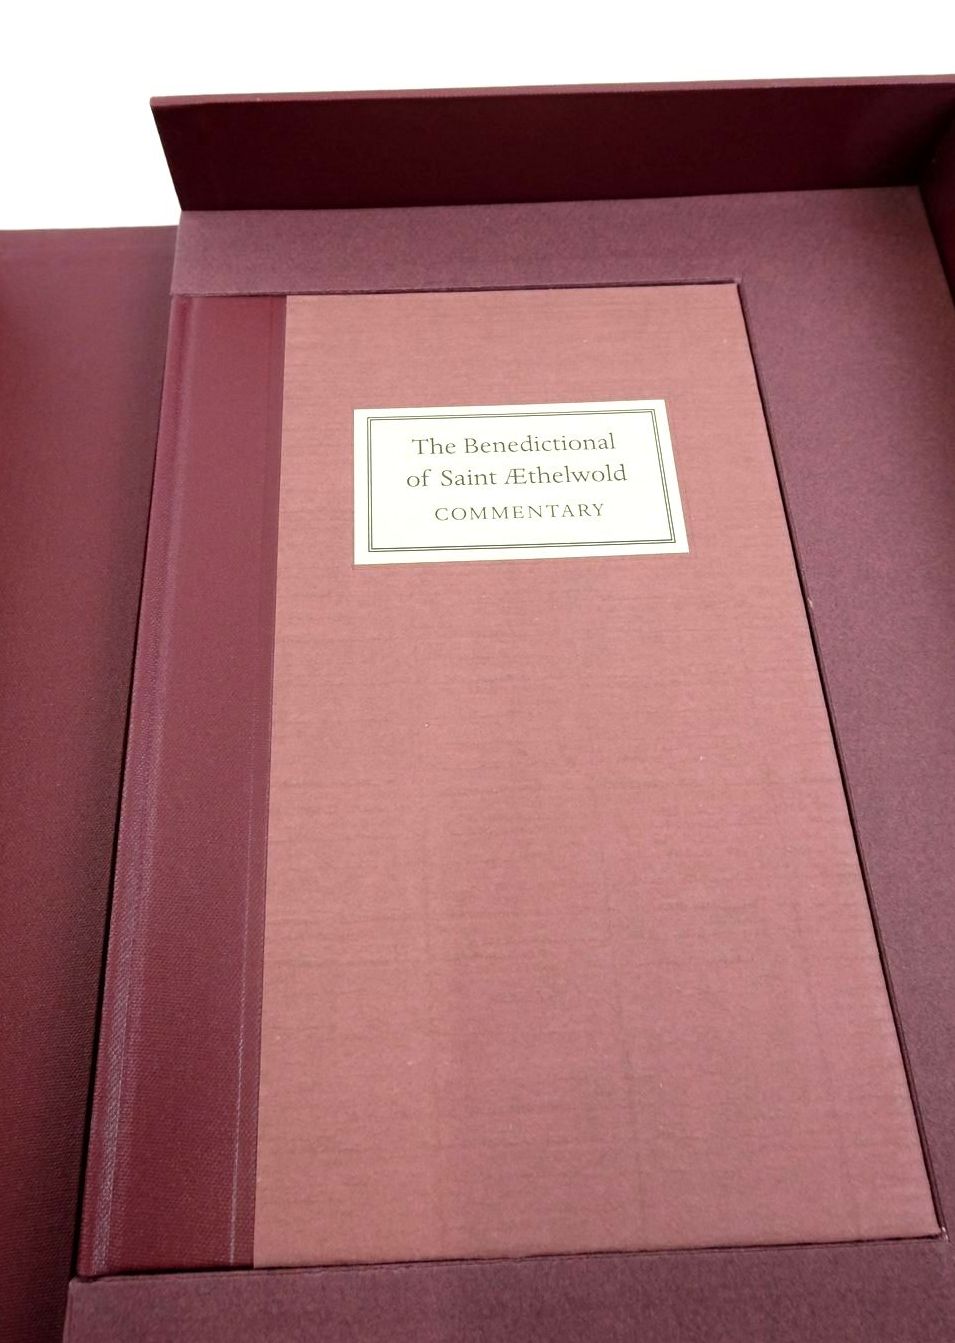 Photo of THE BENEDICTIONAL OF SAINT AETHELWOLD written by Prescott, Andrew published by Folio Society (STOCK CODE: 1822335)  for sale by Stella & Rose's Books